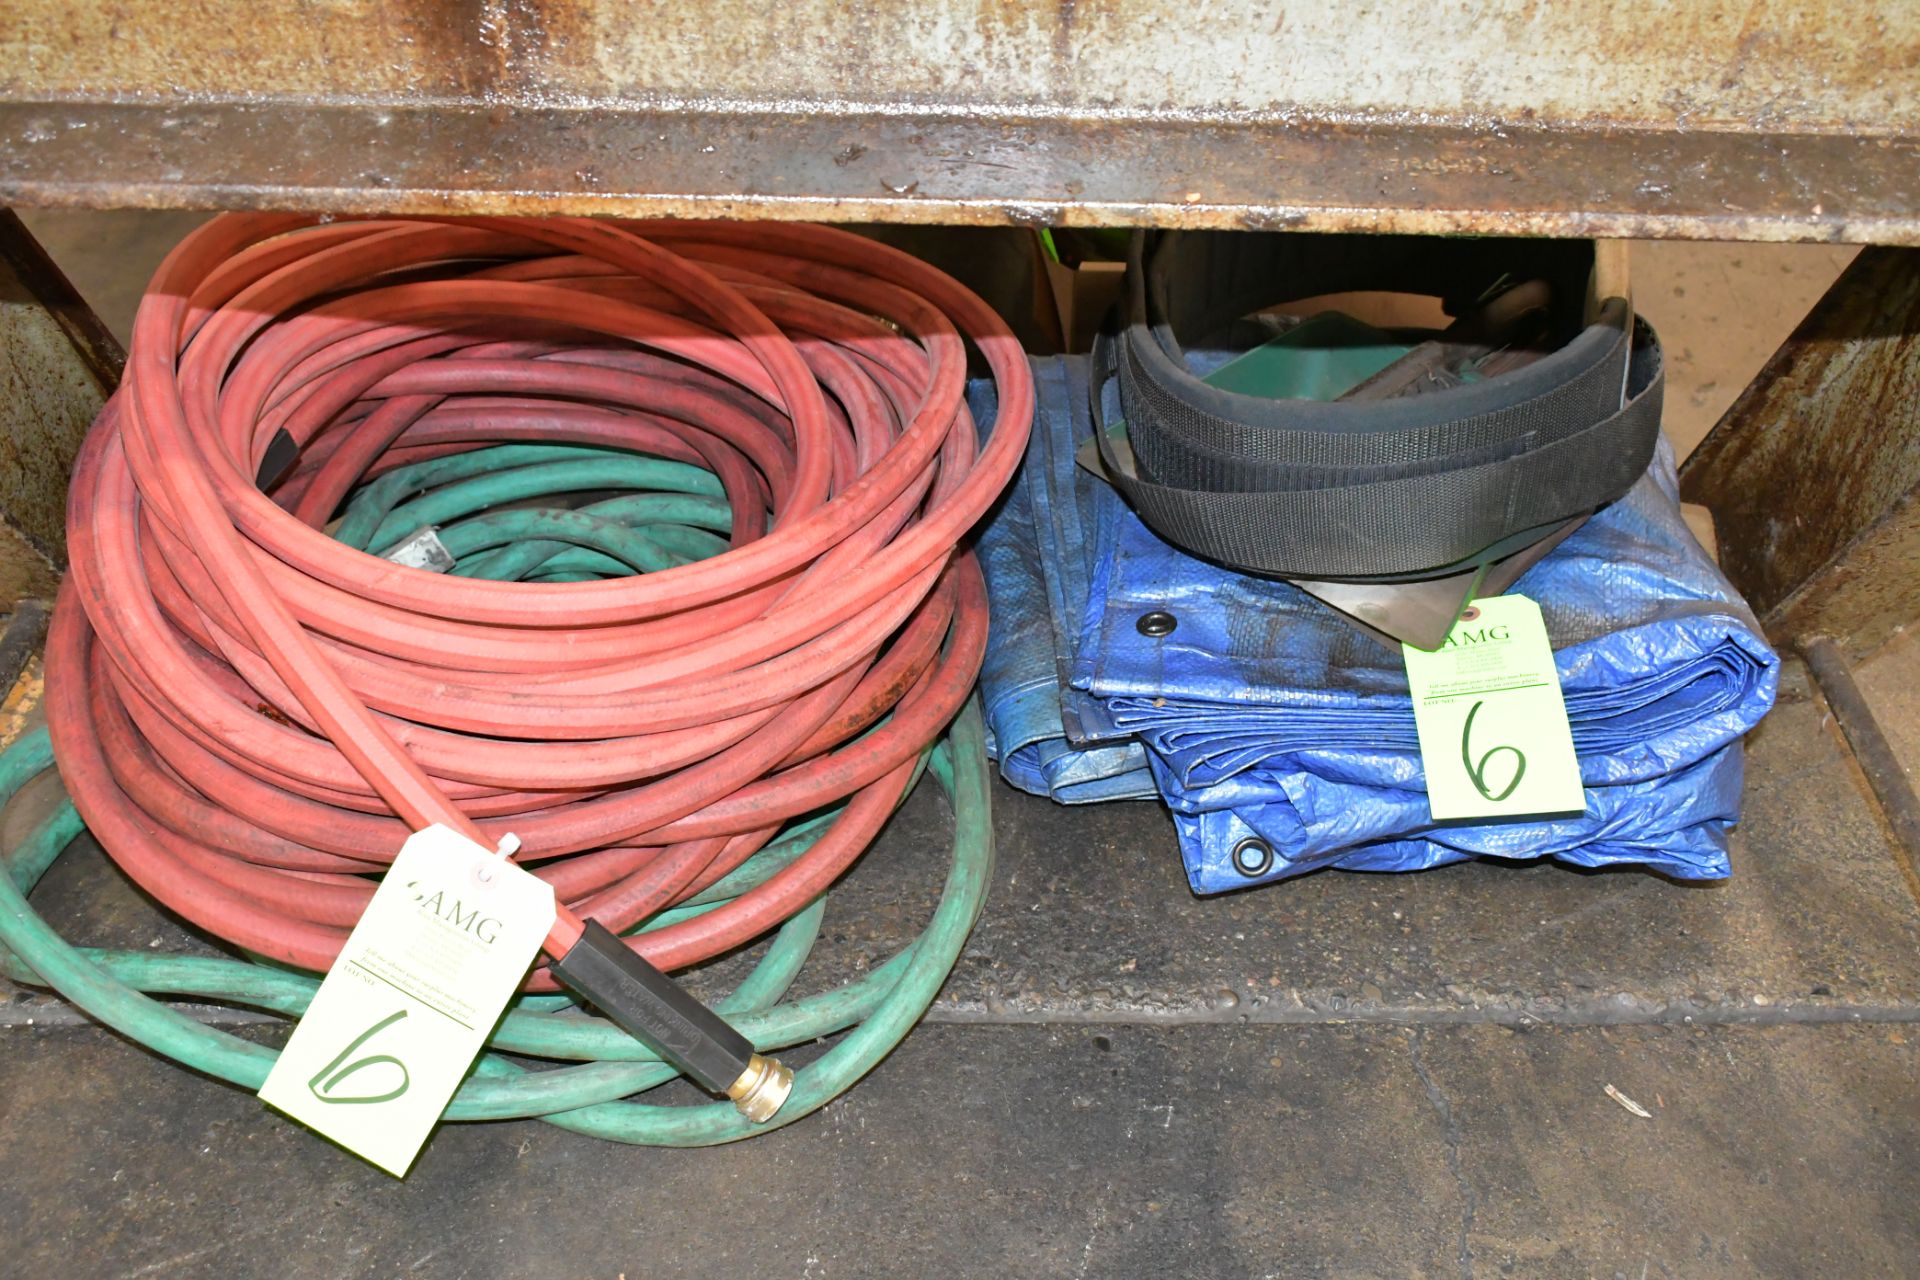 Lot-Tarps, Hoses, and Strap on Floor Under (1) Bench - Image 2 of 2